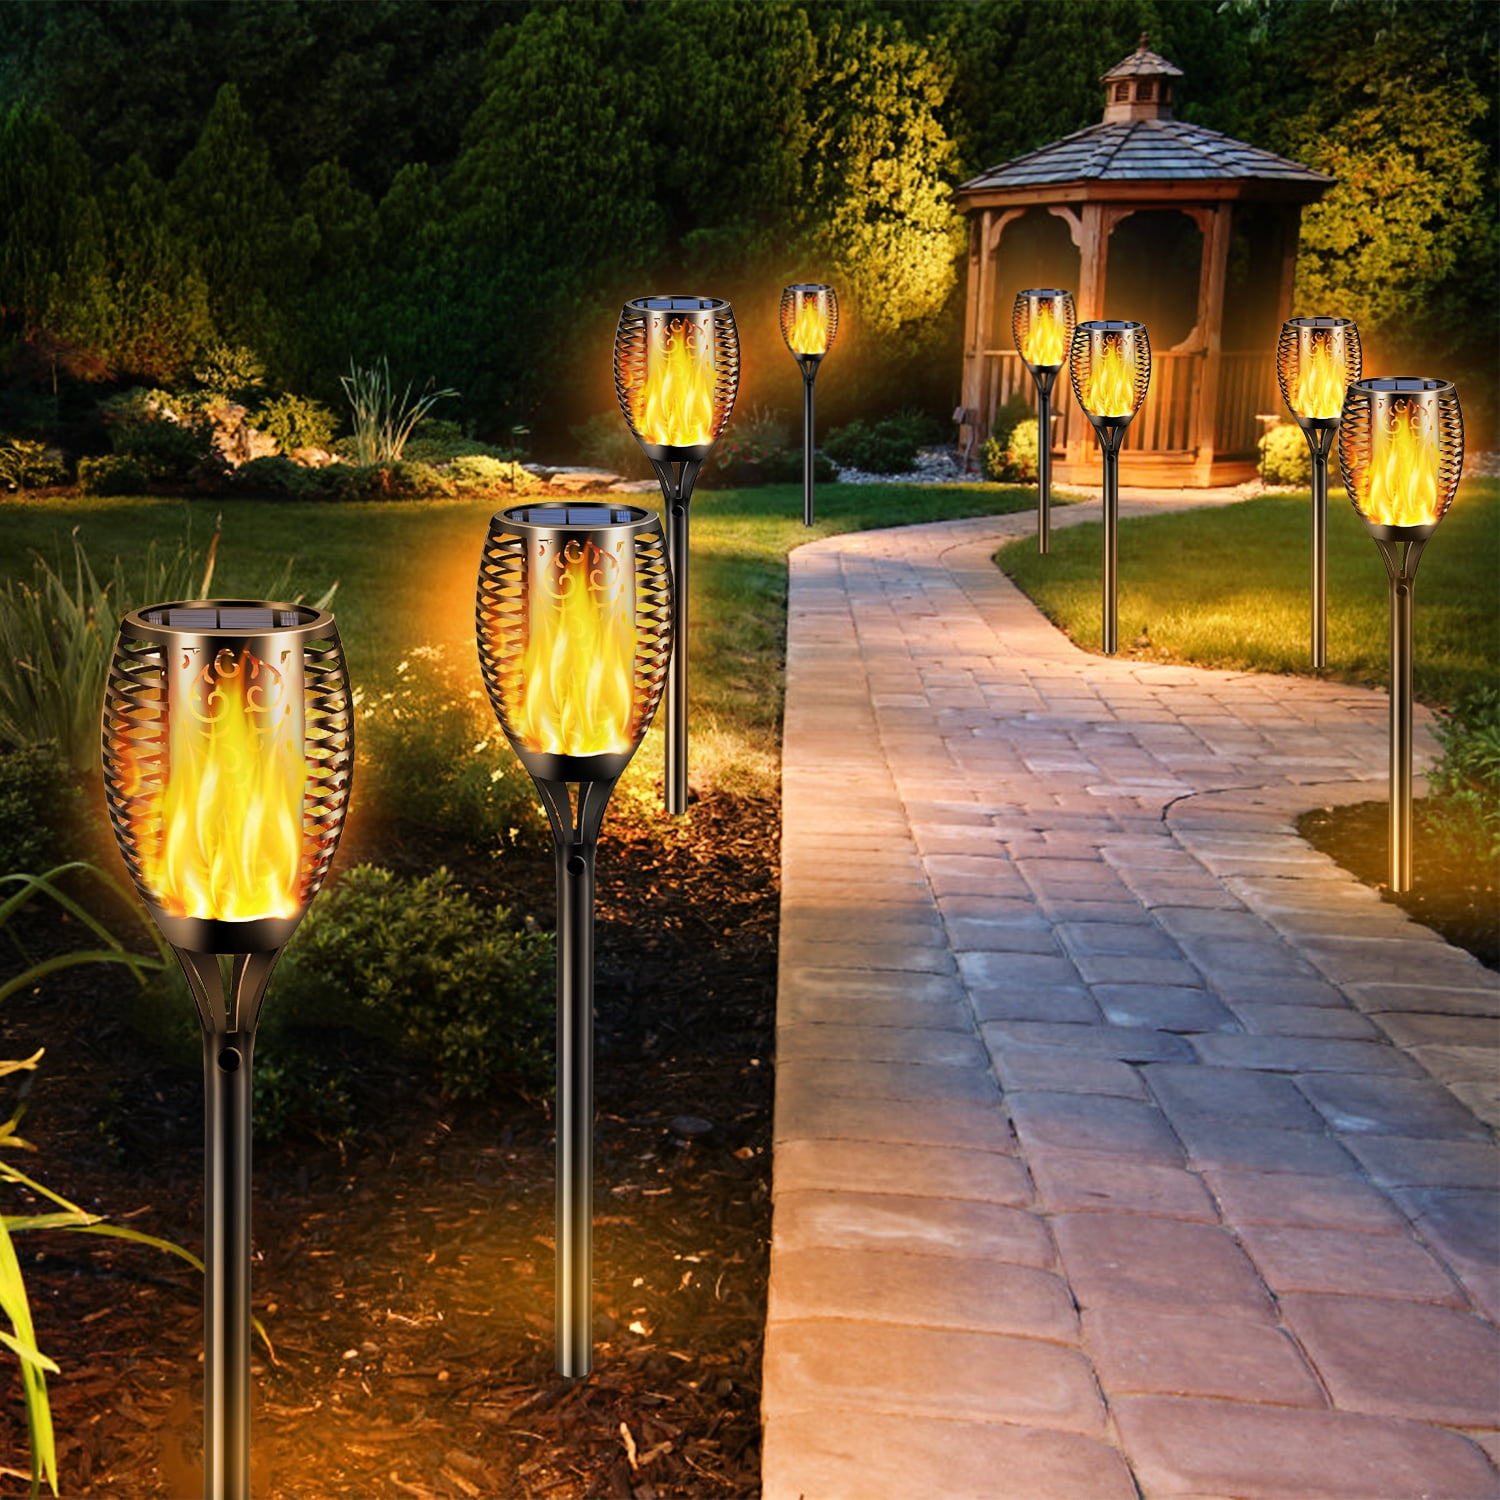 96 LED Solar Flame Torch Light Dancing Flickering Flame Pathway Garden Yard Lamp 